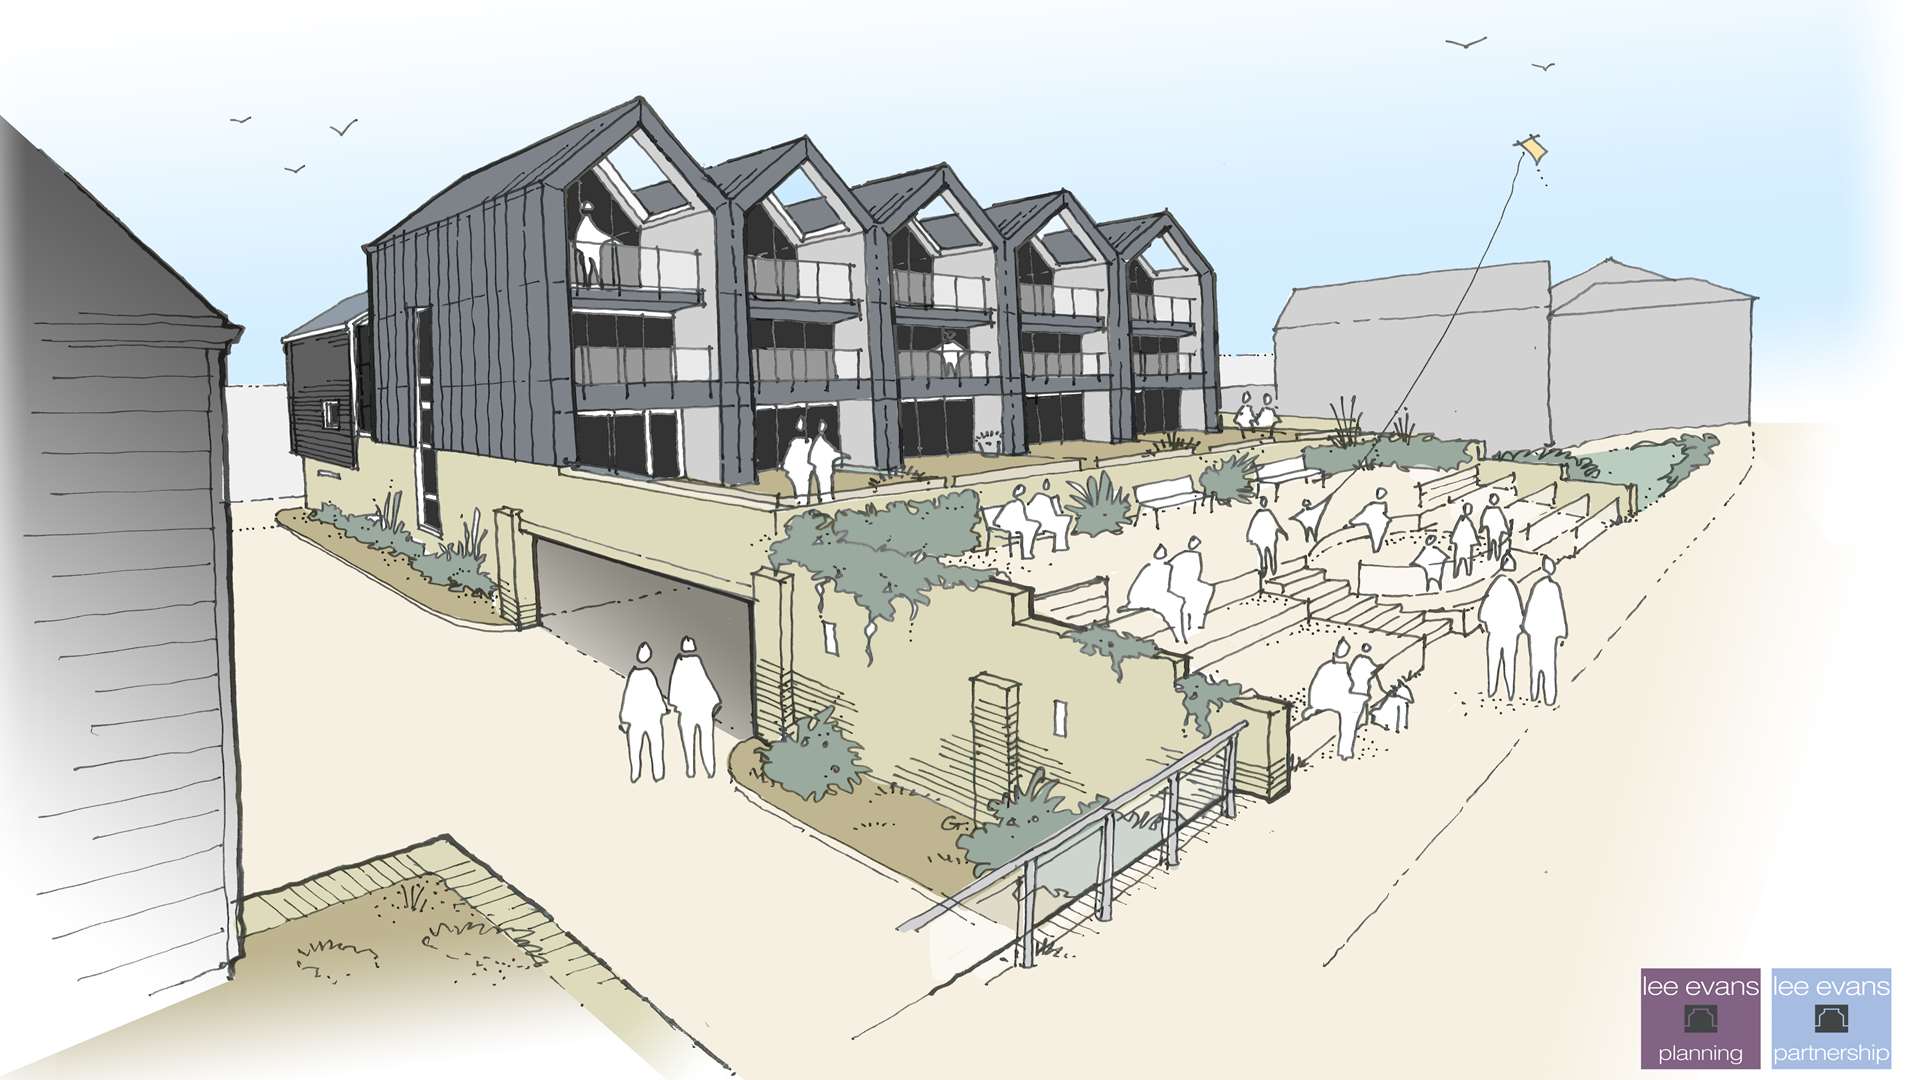 Revised plans for the Oval Chalet site in Whitstable. Picture: Lee Evans Planning